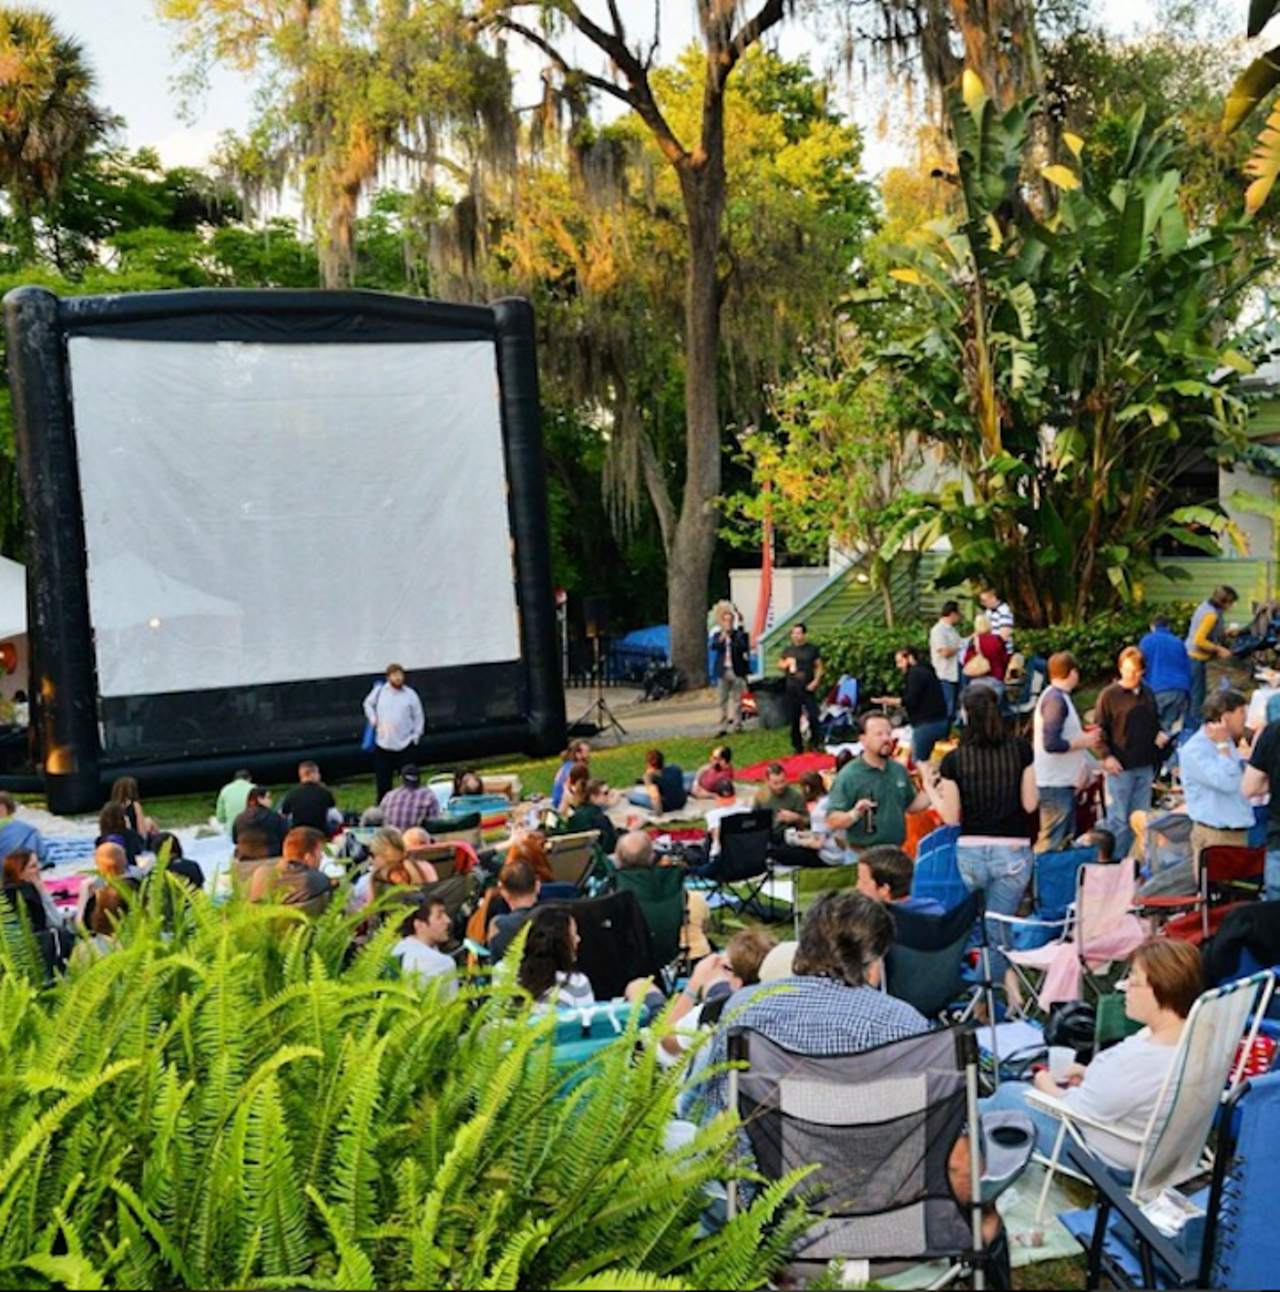 16. A Wednesday Night Pitcher Show at Enzian's Theater
The weekly movies on the lawn provide the perfect makeout spot for all you film geeks out there.
Photo via floridafilmfest/Instagram